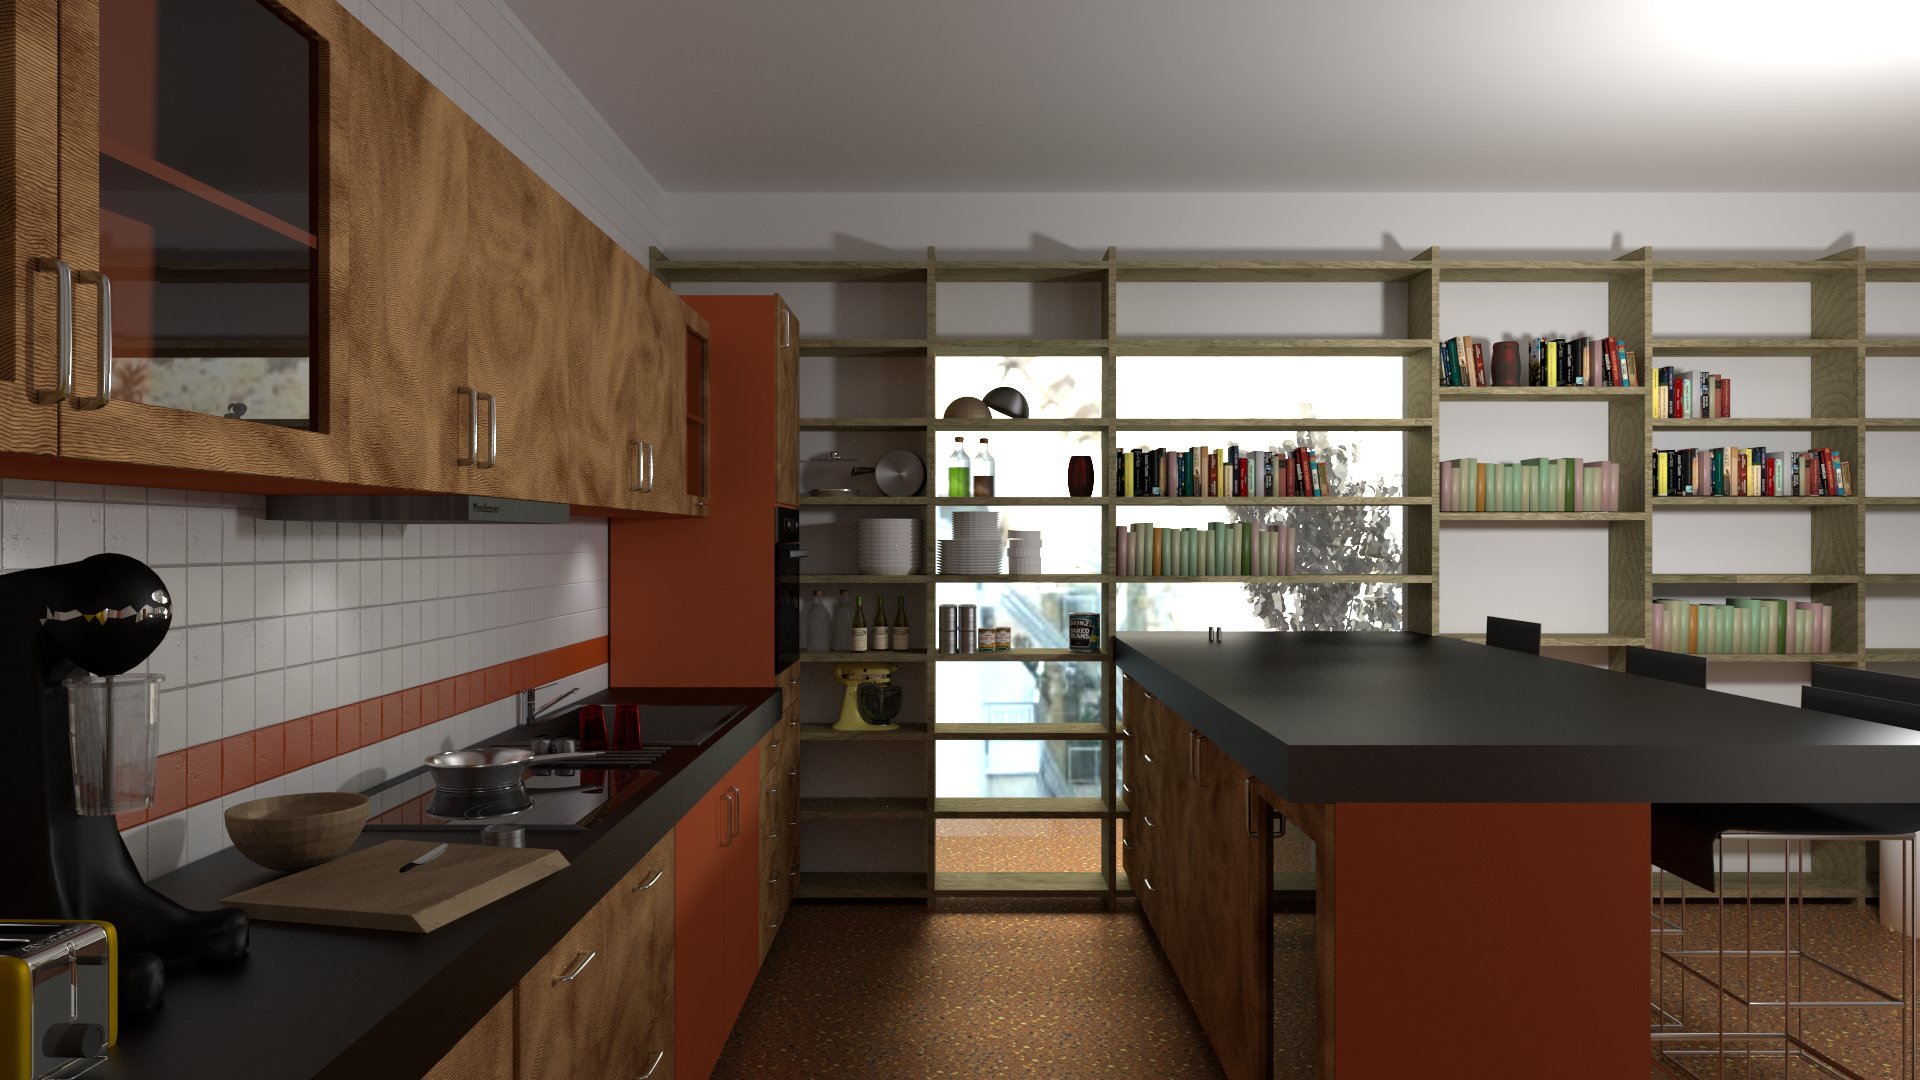 A 3D visualization of a kitchen, looking out through a bookcase